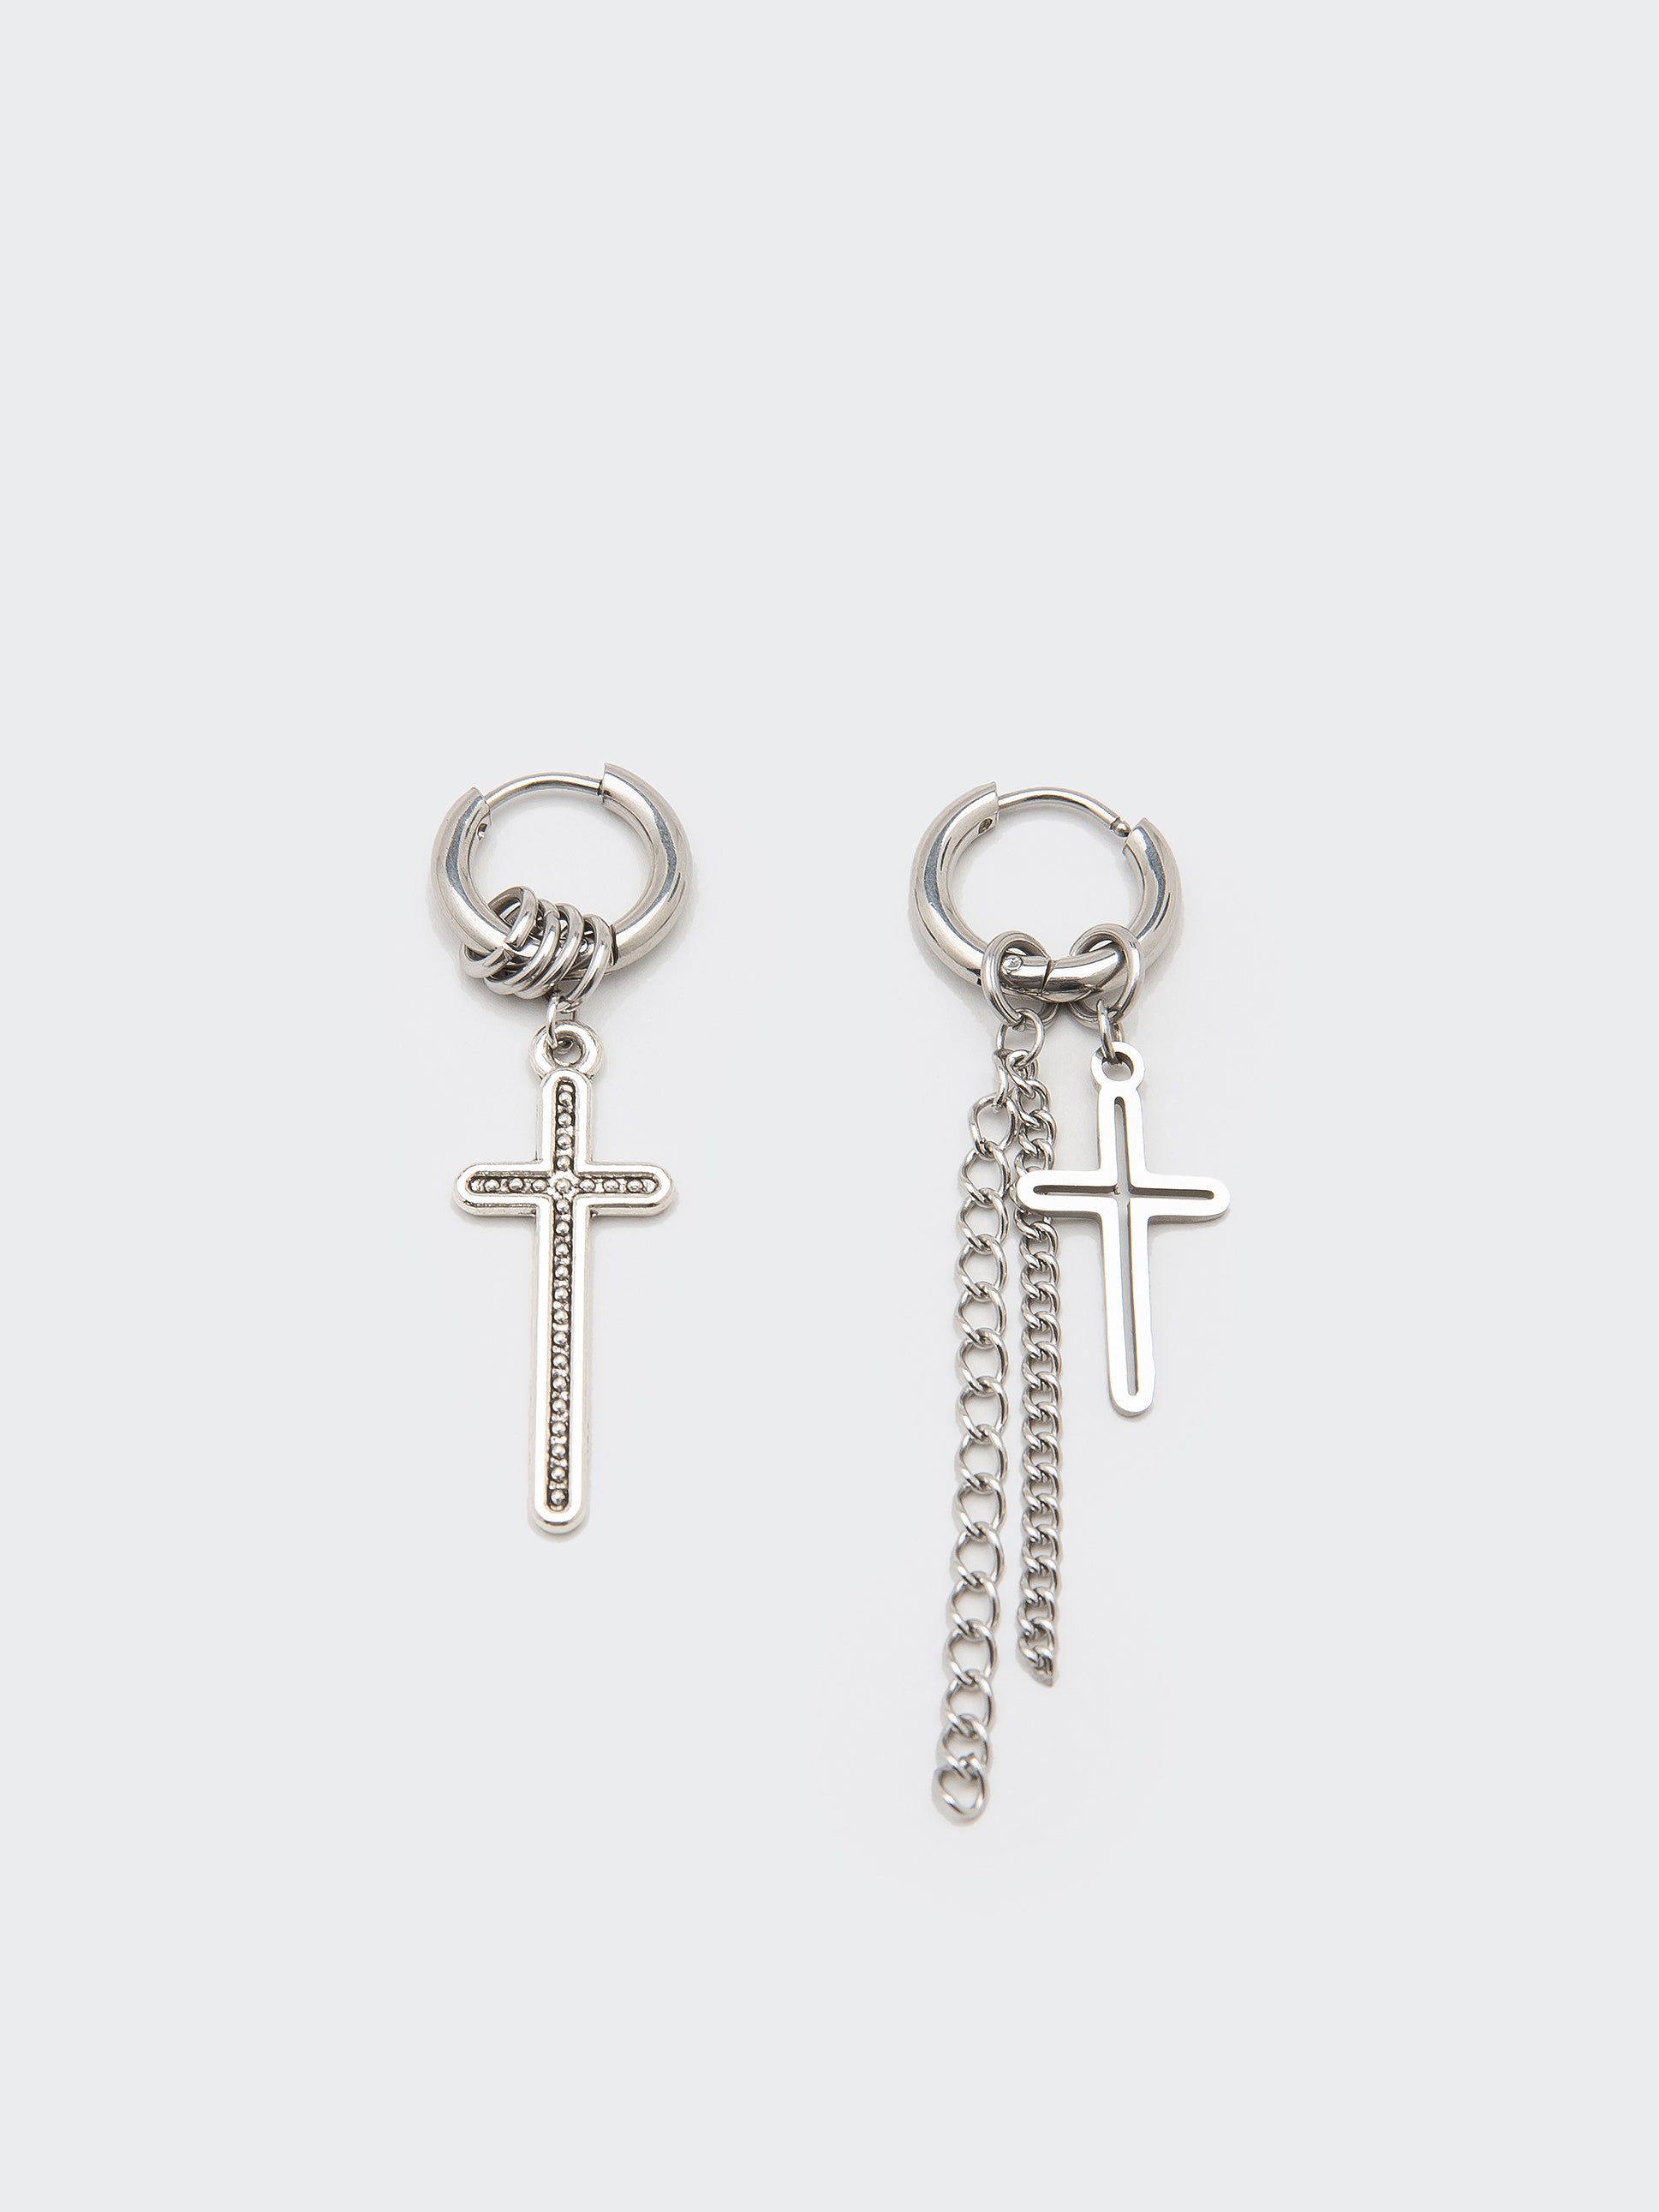 Silver drop earrings with cross, hoops and chain pendants